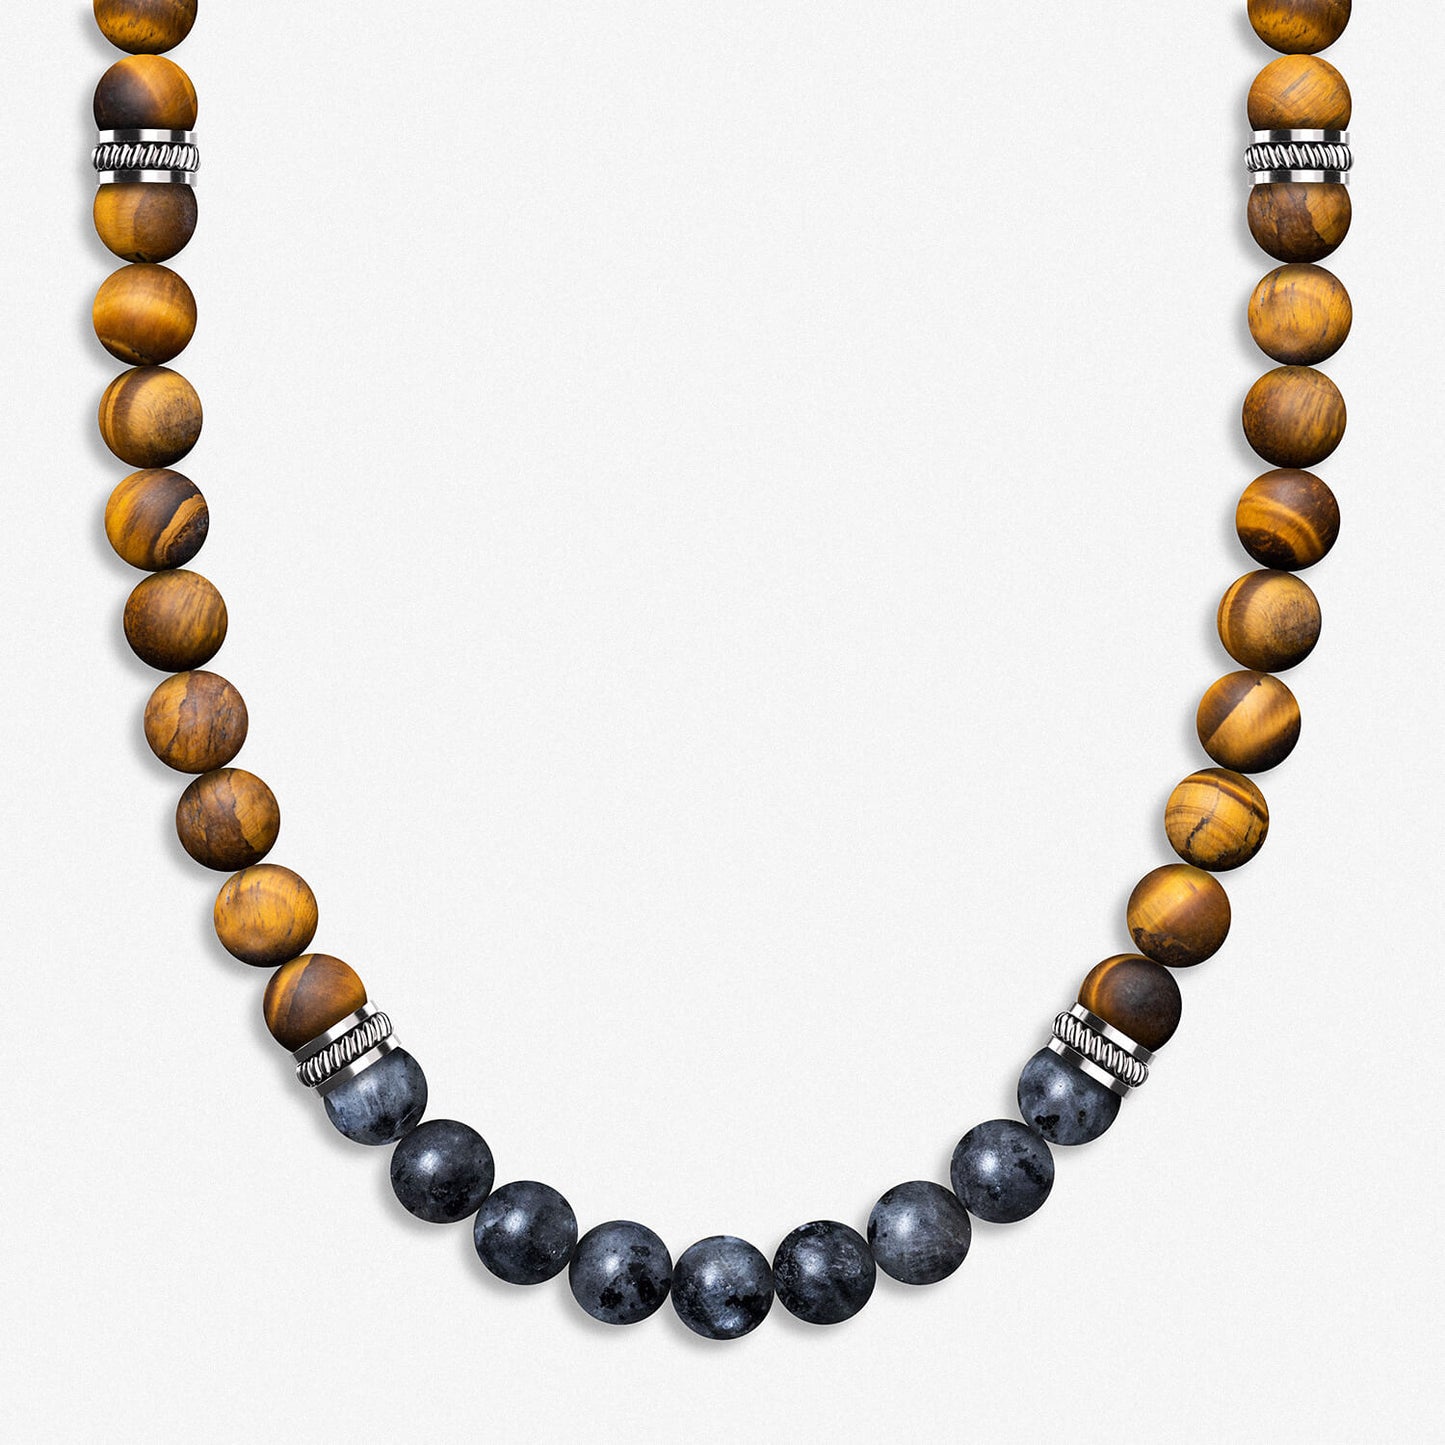 Beaded Necklace / 925 Sterling Silver, Tiger's Eye & Larvikite